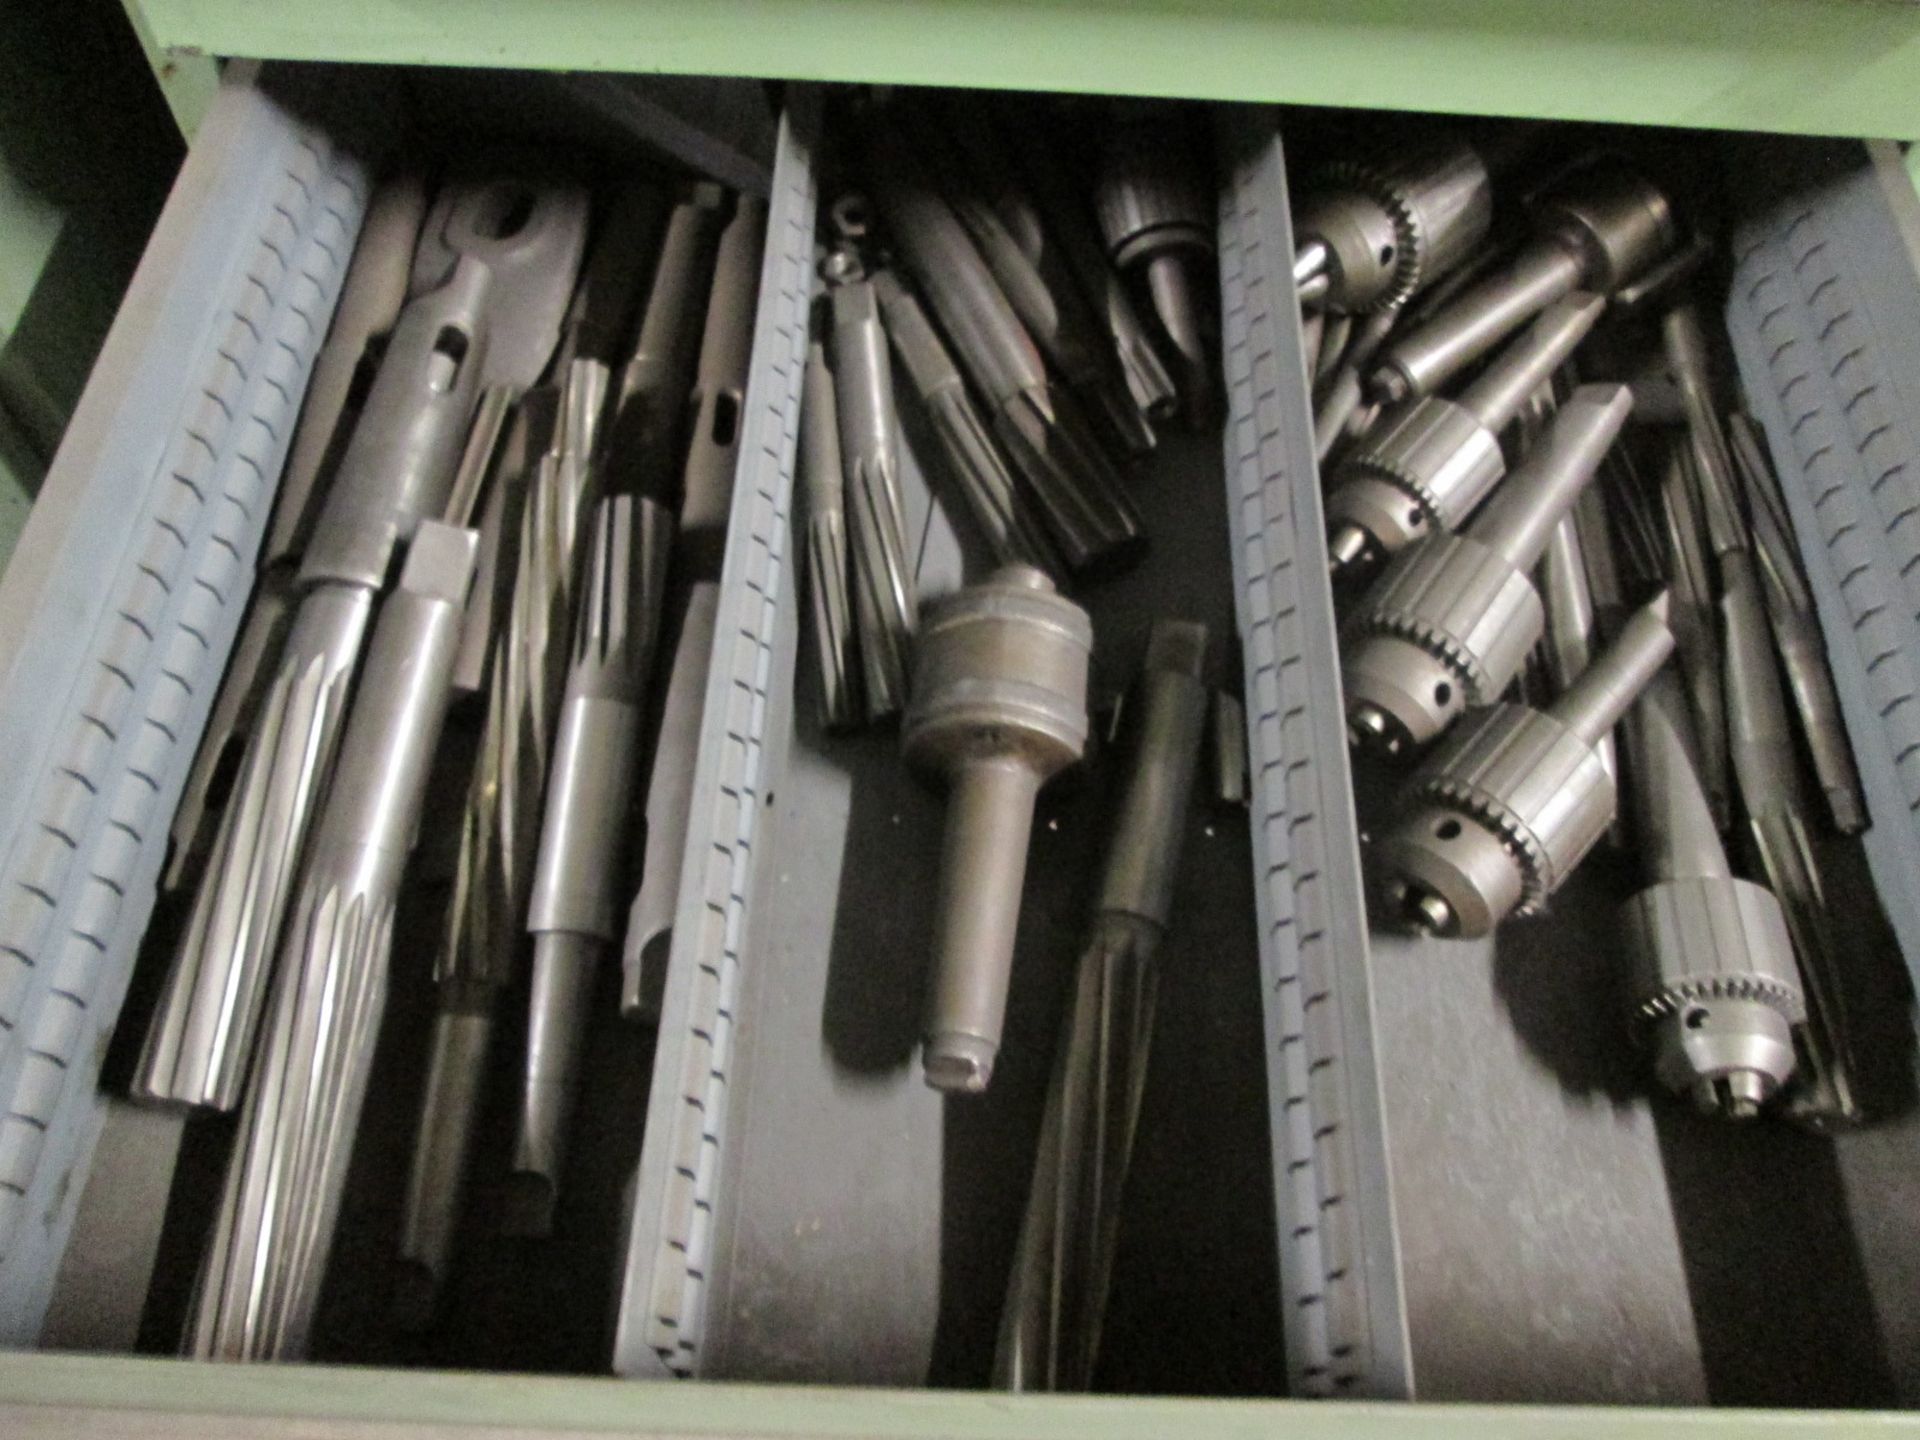 Drill and Reamer Cabinet, 4 drawer and 2 door cabinet with various drills, reamers and grinding - Image 2 of 6